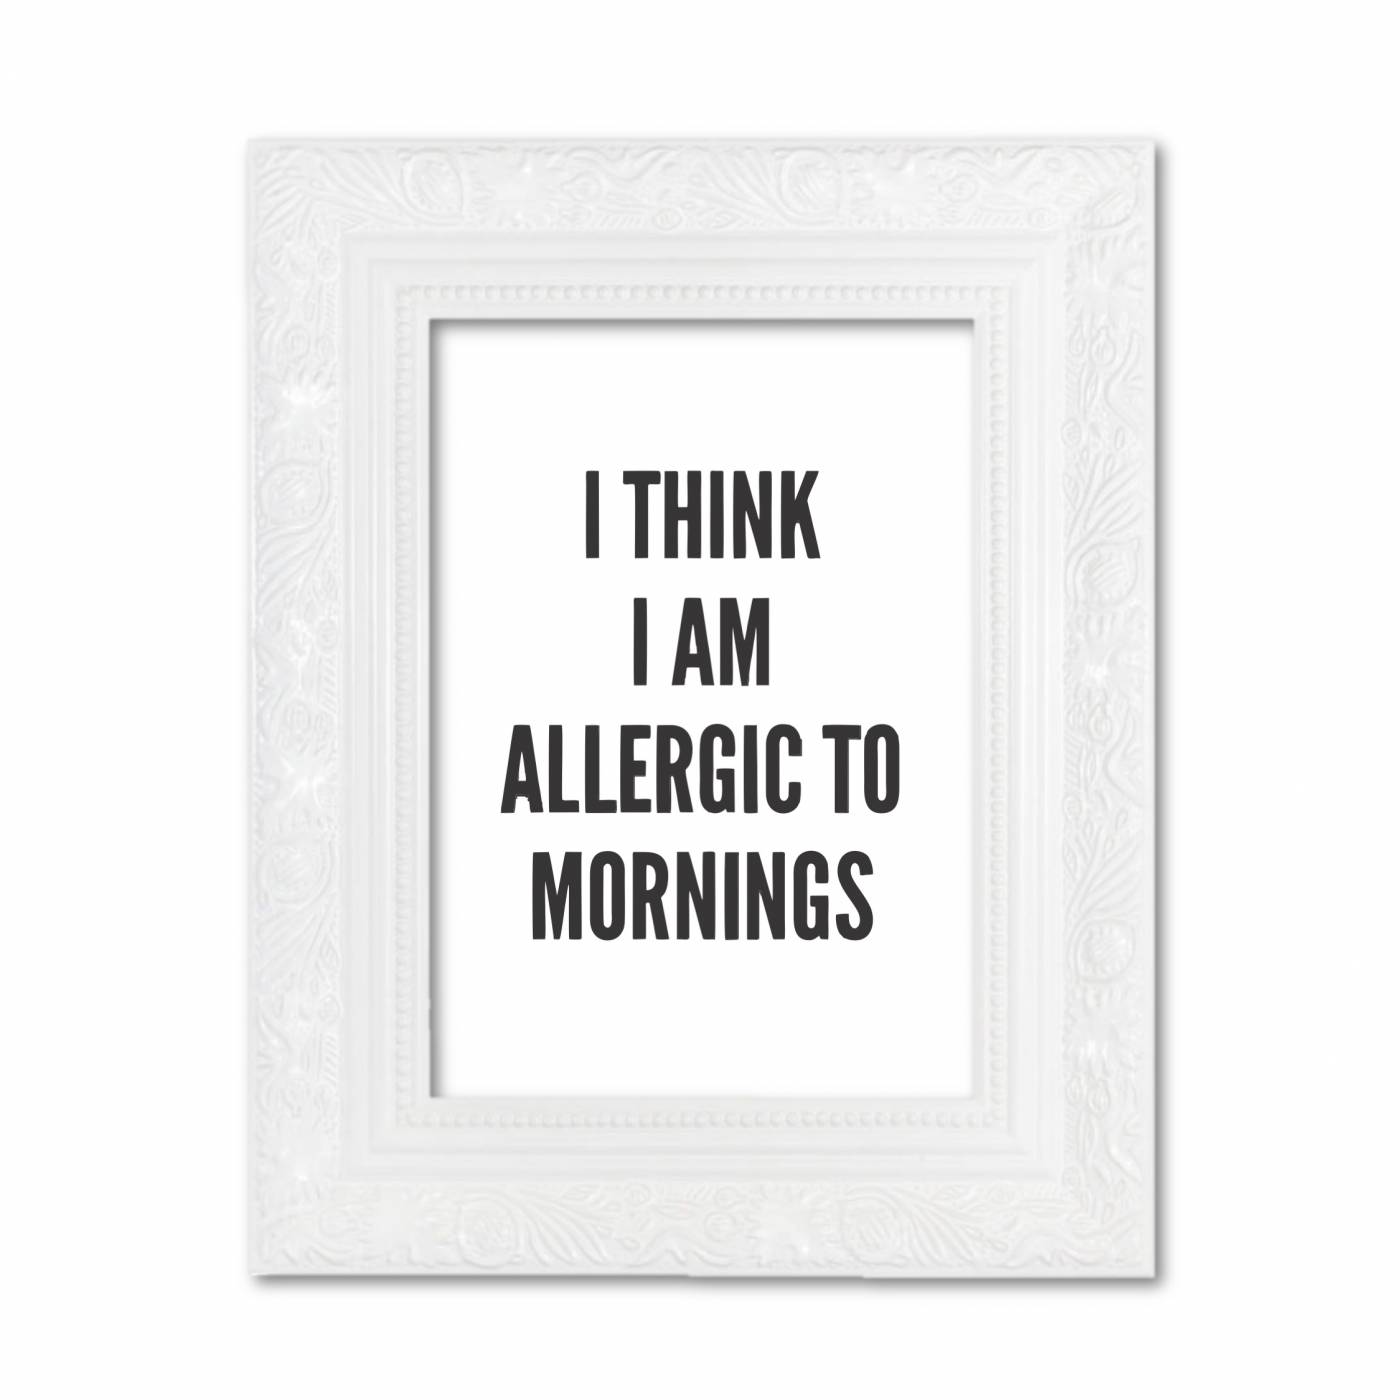 Allergic to morning